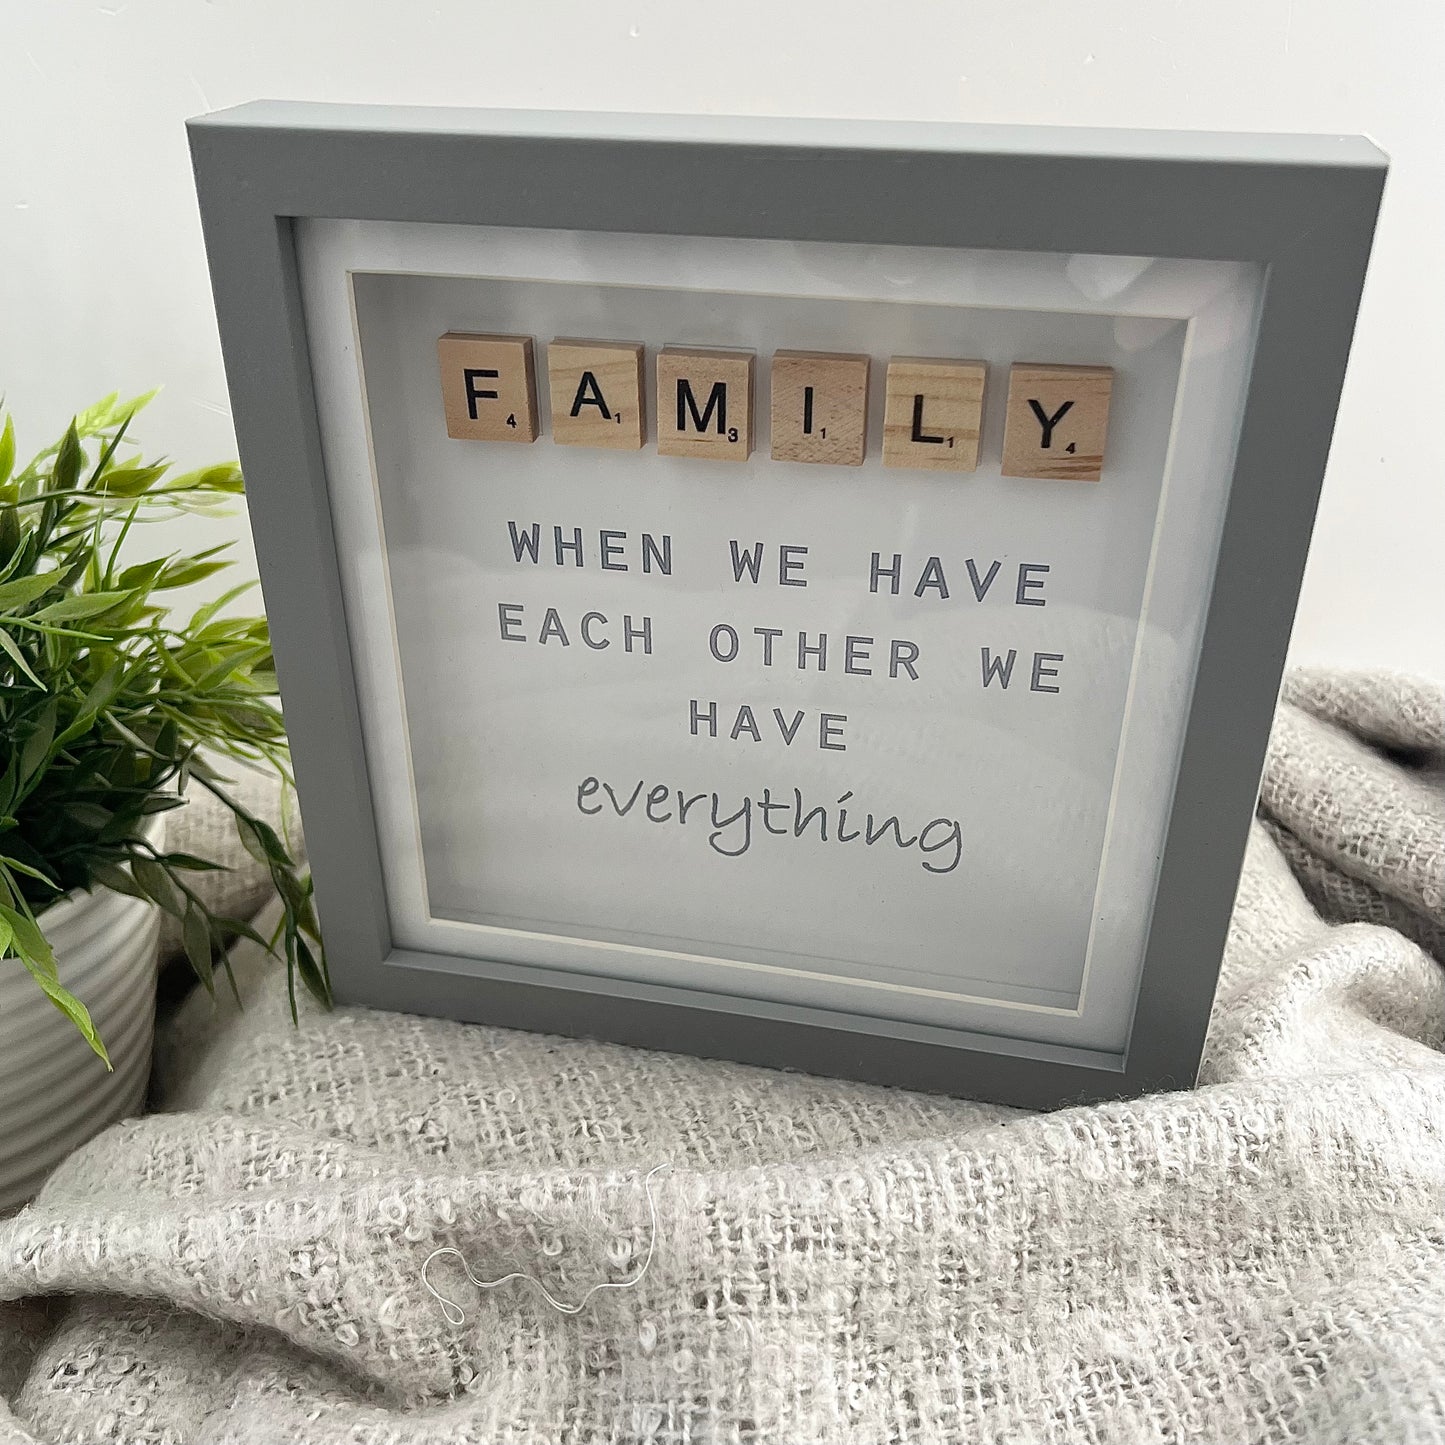 Framed "Family is everything" Quote